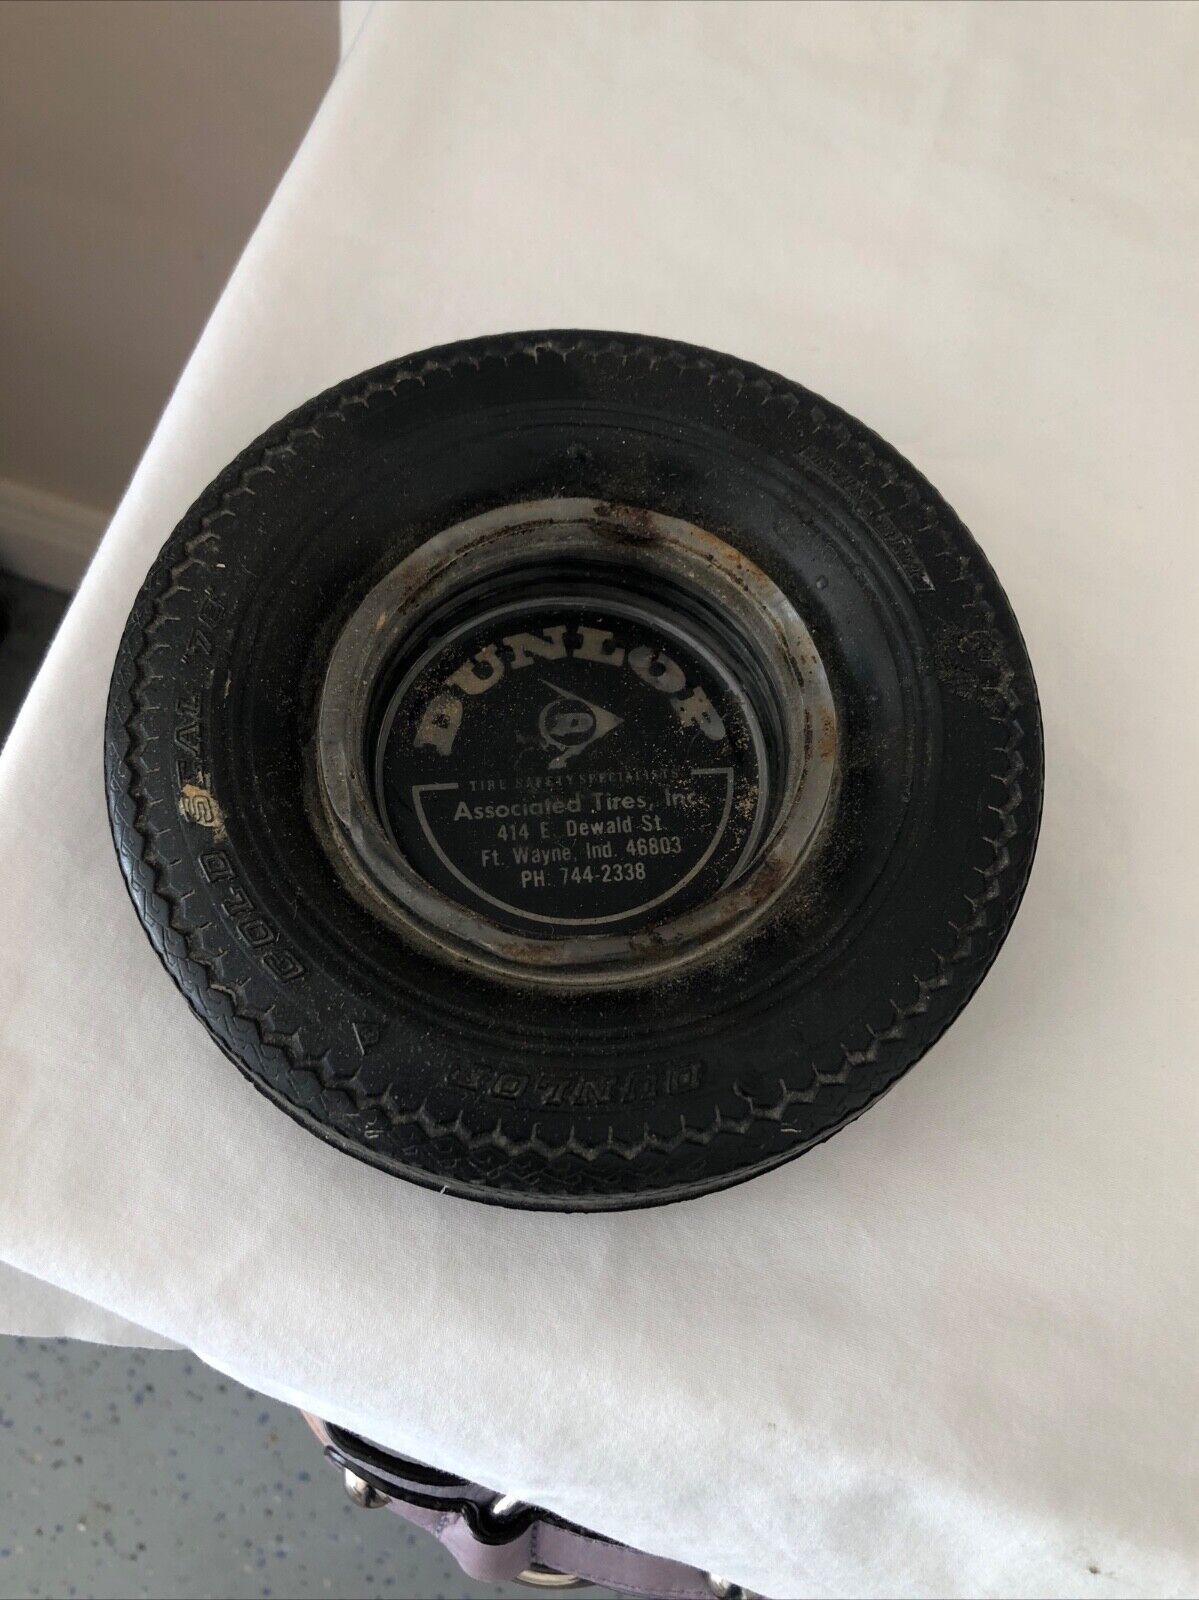 Vintage Dunlop Quality Counts Advertising Tire Ashtray